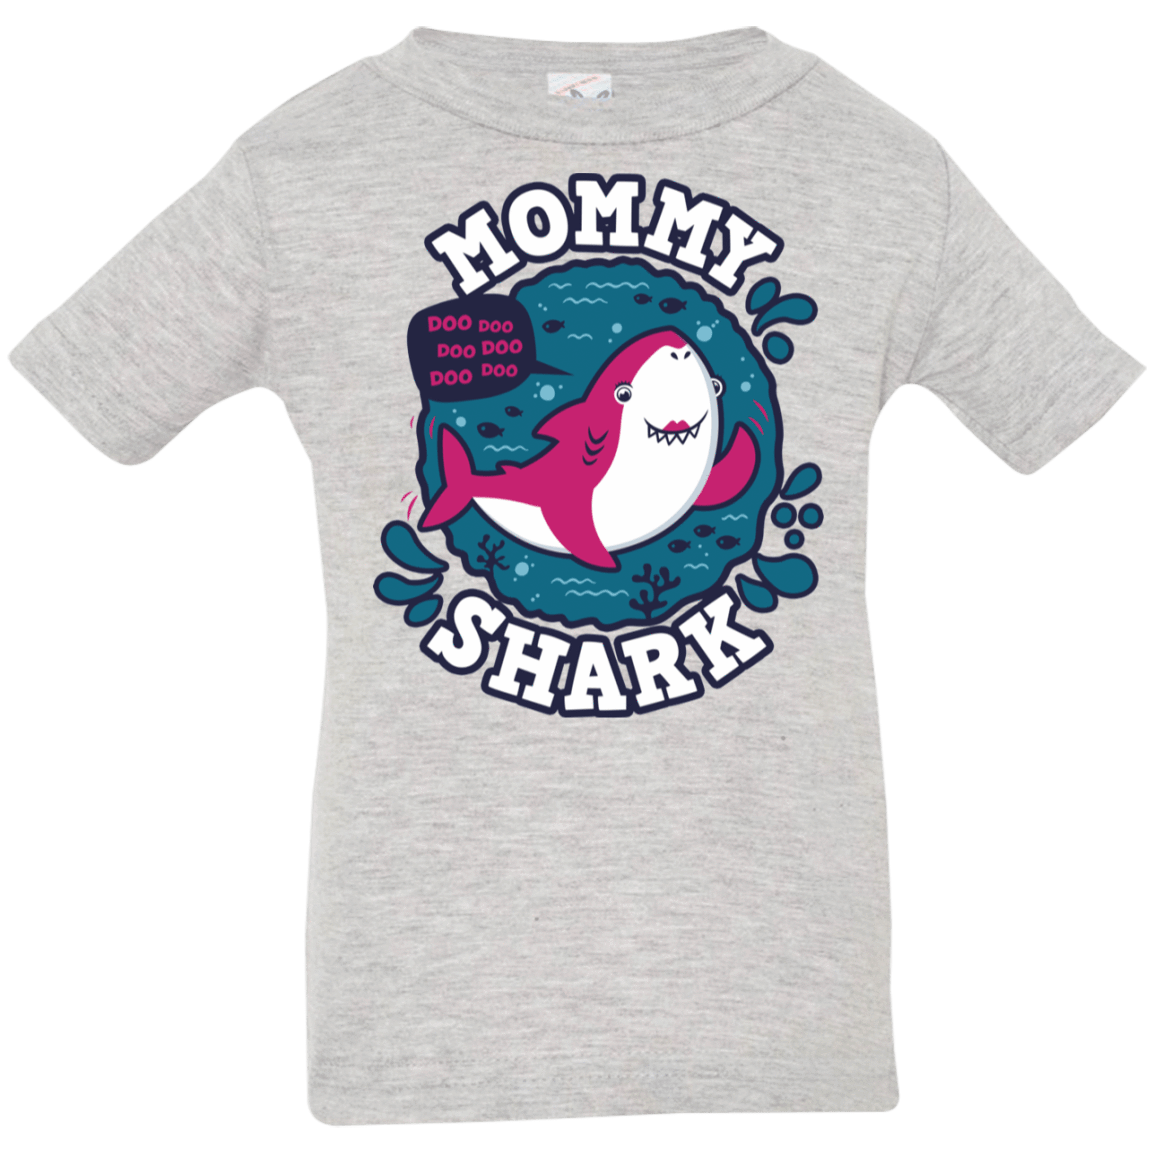 T-Shirts Heather Grey / 6 Months Shark Family trazo - Mommy Infant Premium T-Shirt